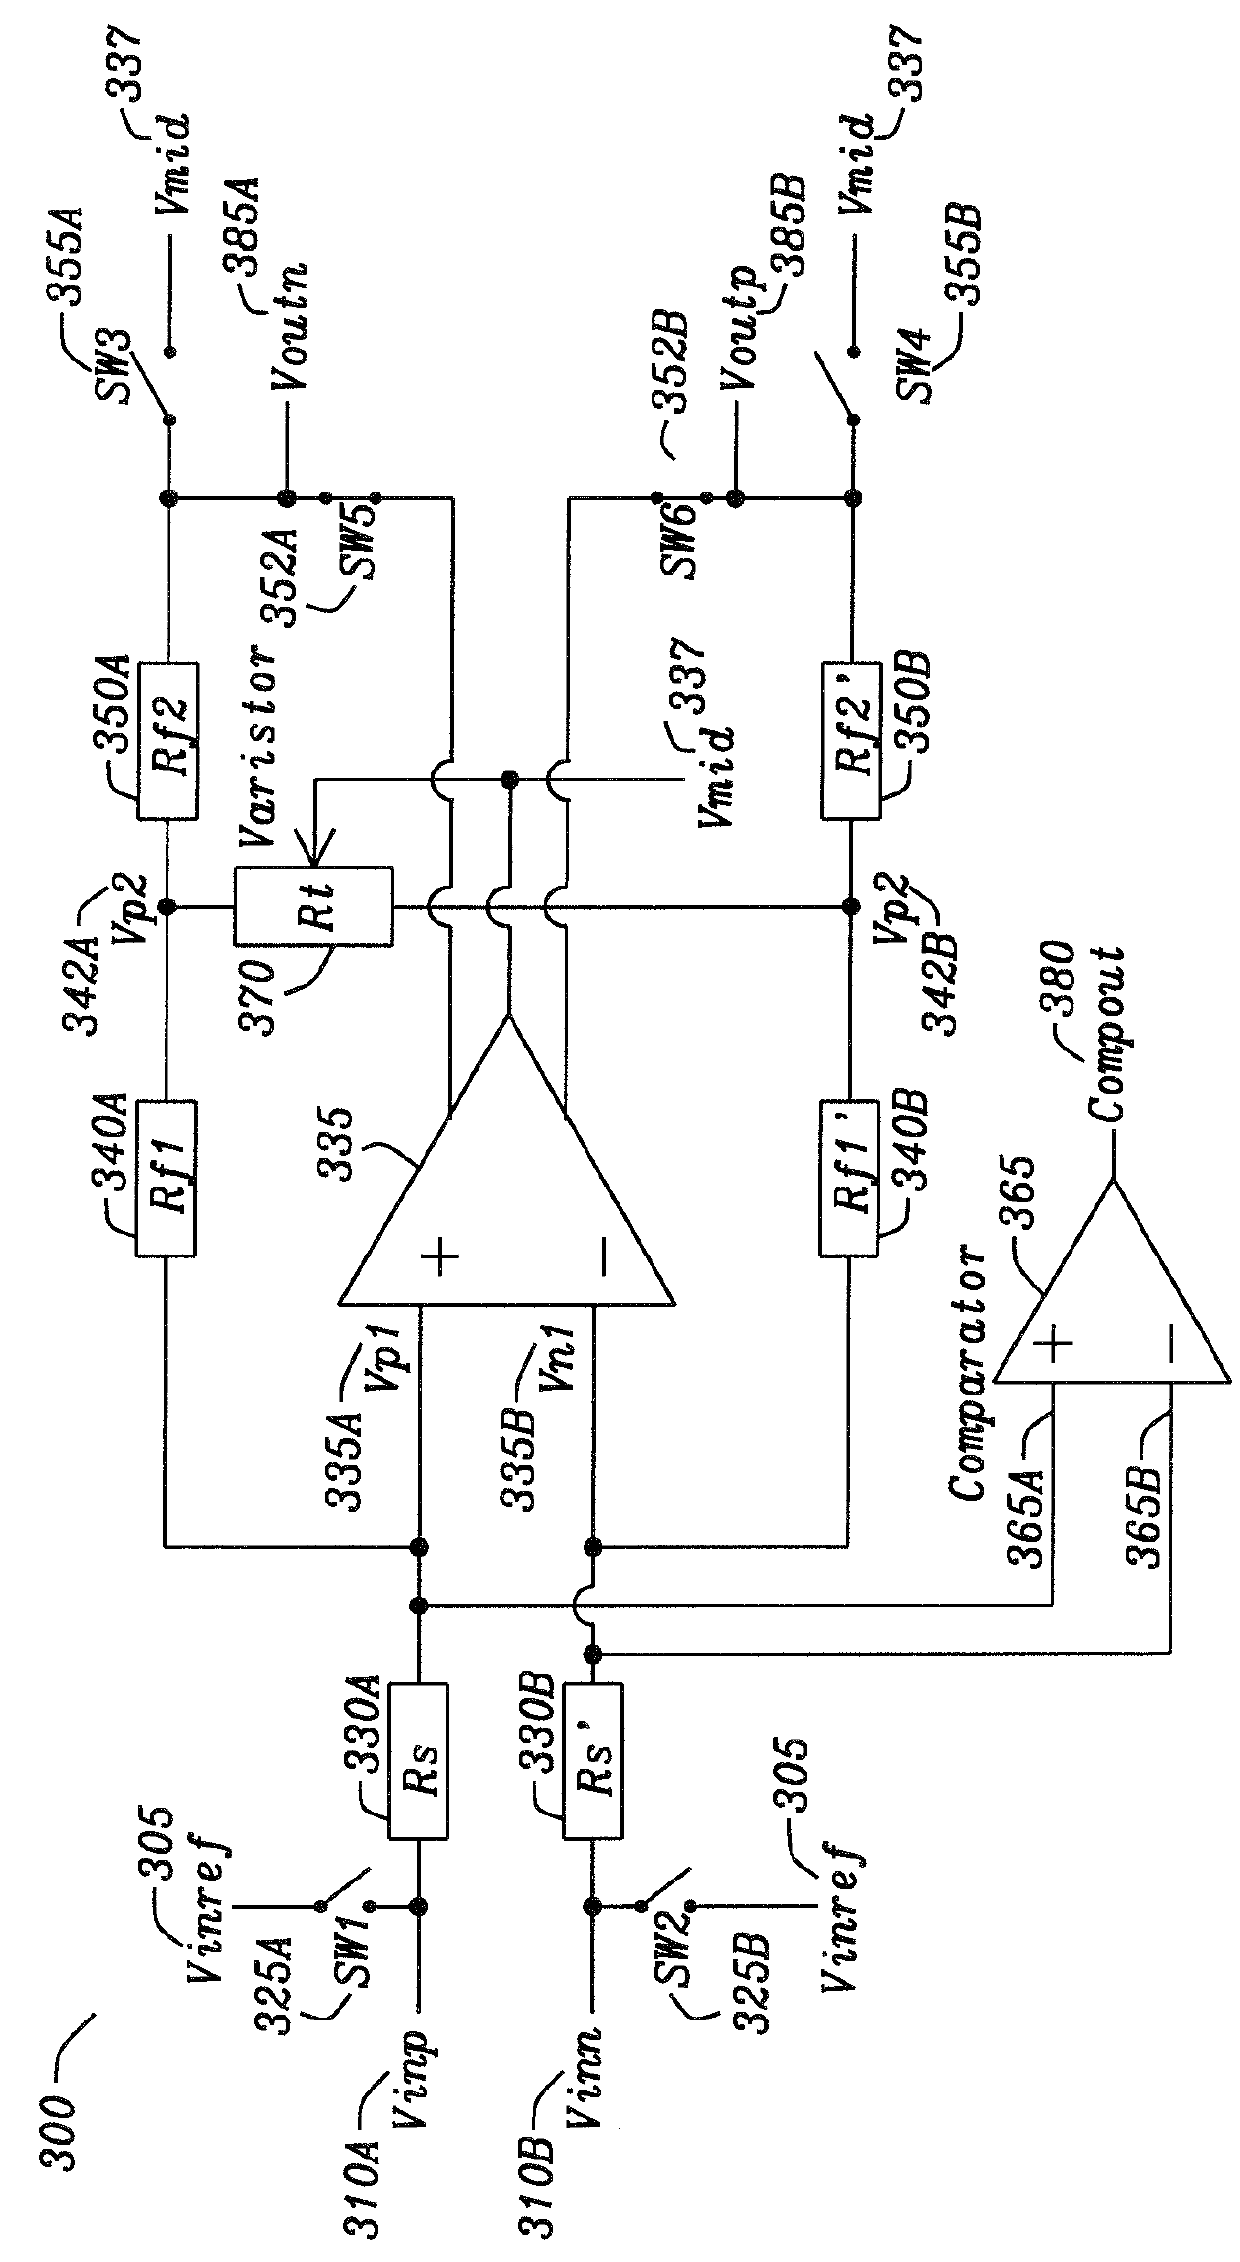 Circuit and Method for a High Common Mode Rejection Amplifier by Using a Digitally Controlled Gain Trim Circuit